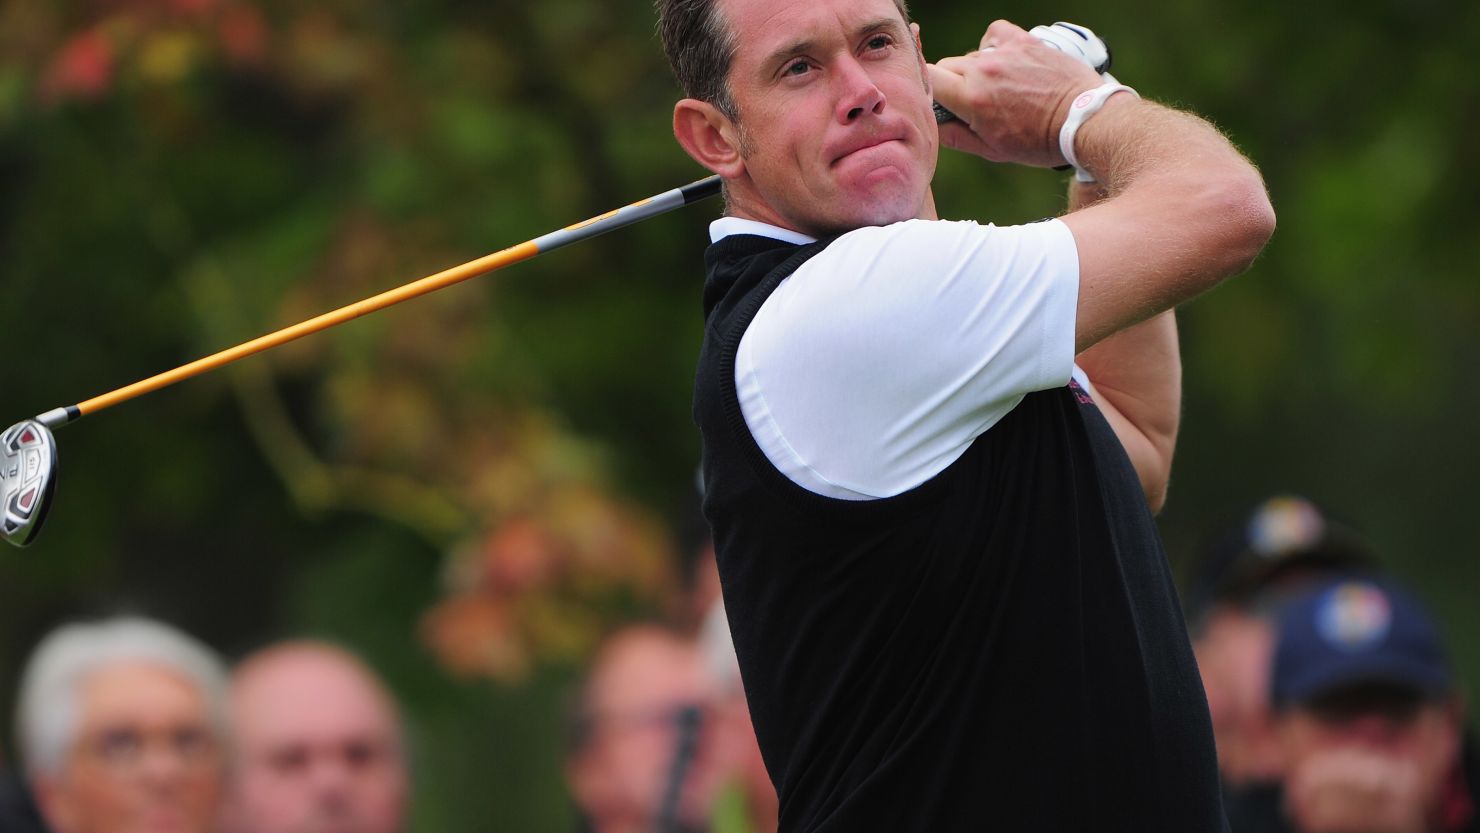 World No.2 Lee Westwood tees off in the morning fourballs on his way to yet another victory